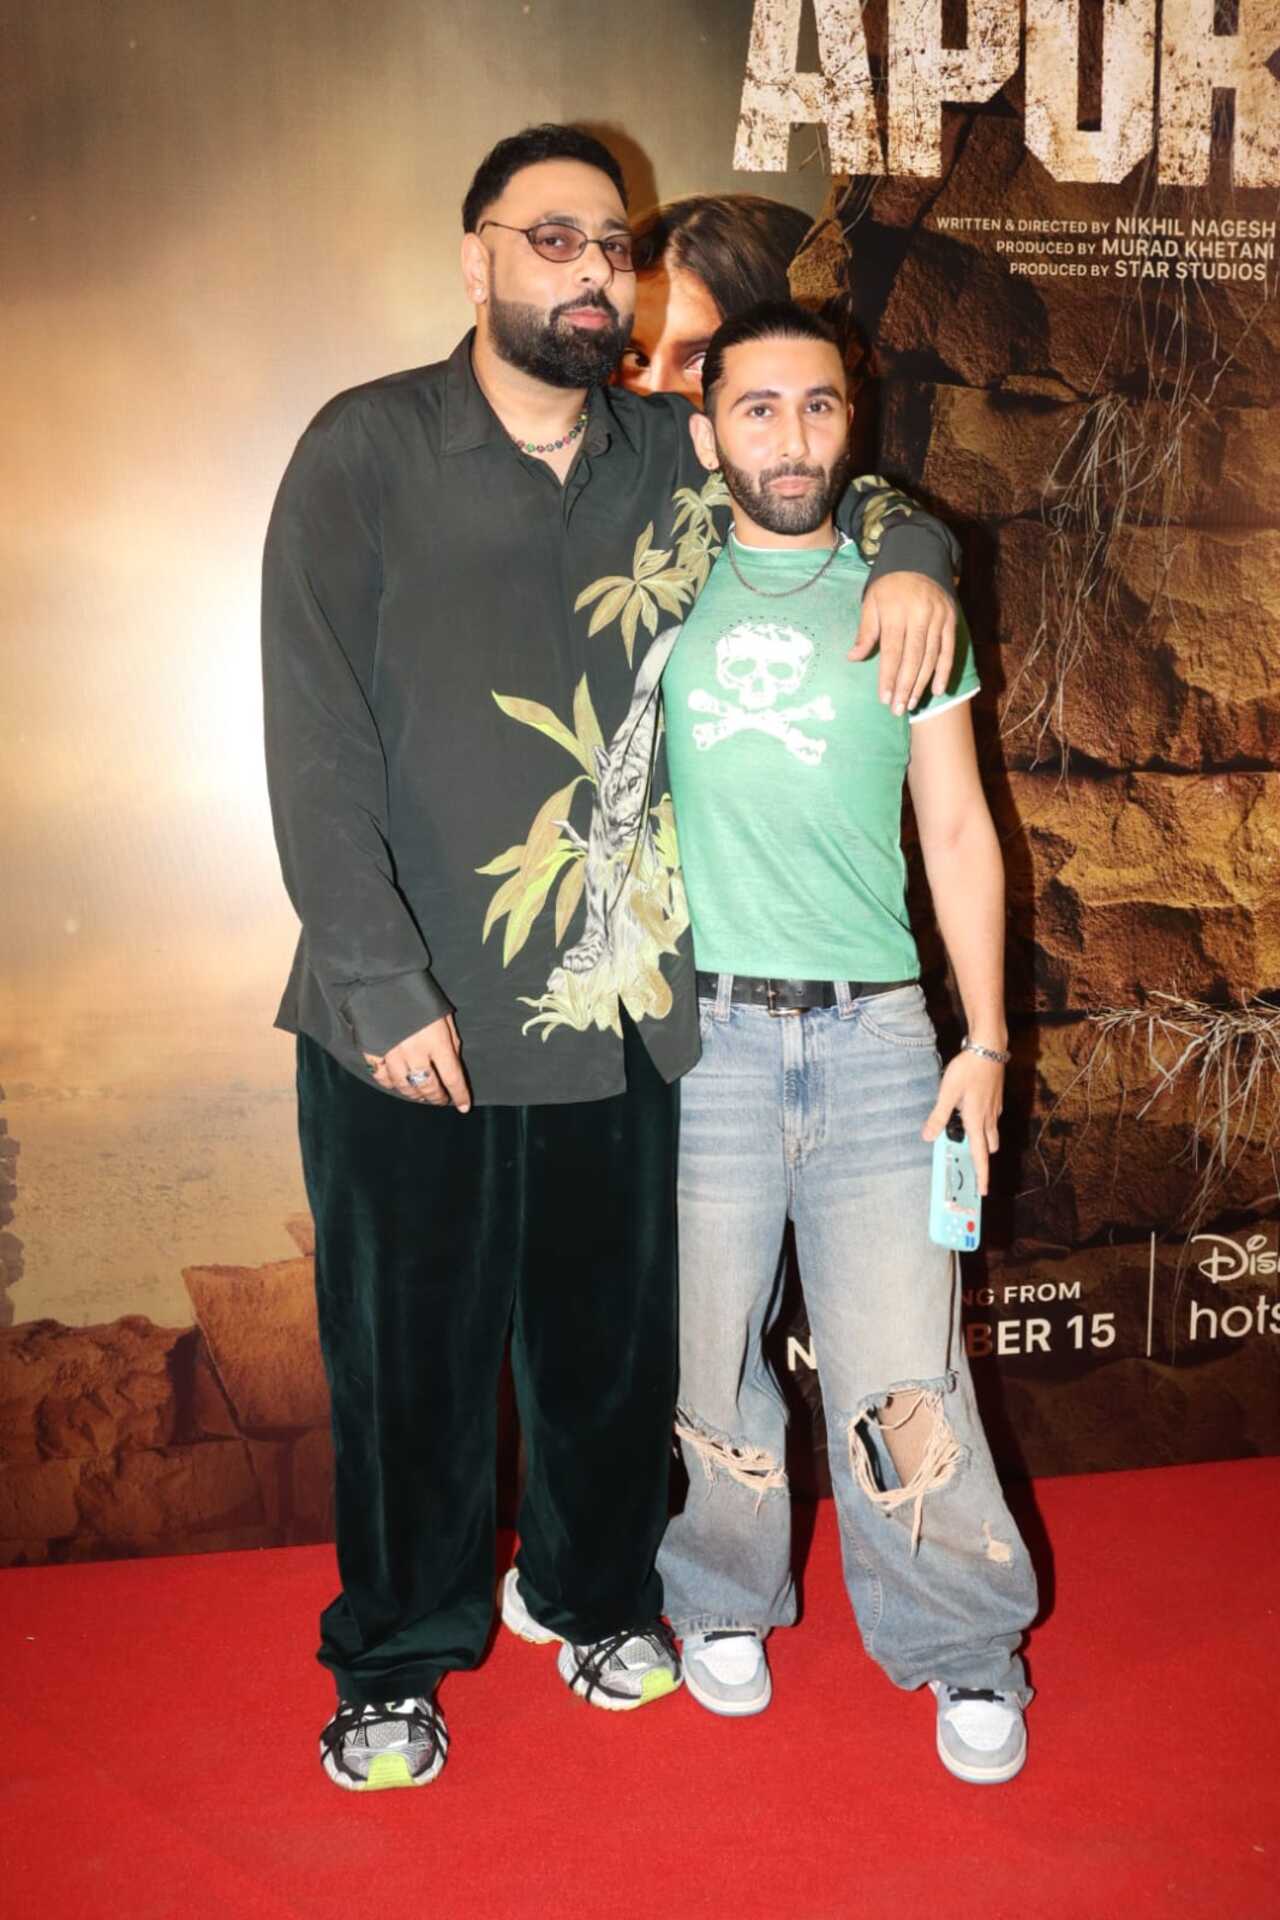 Badshah poses with the popular 'friend of every star kid' Orry